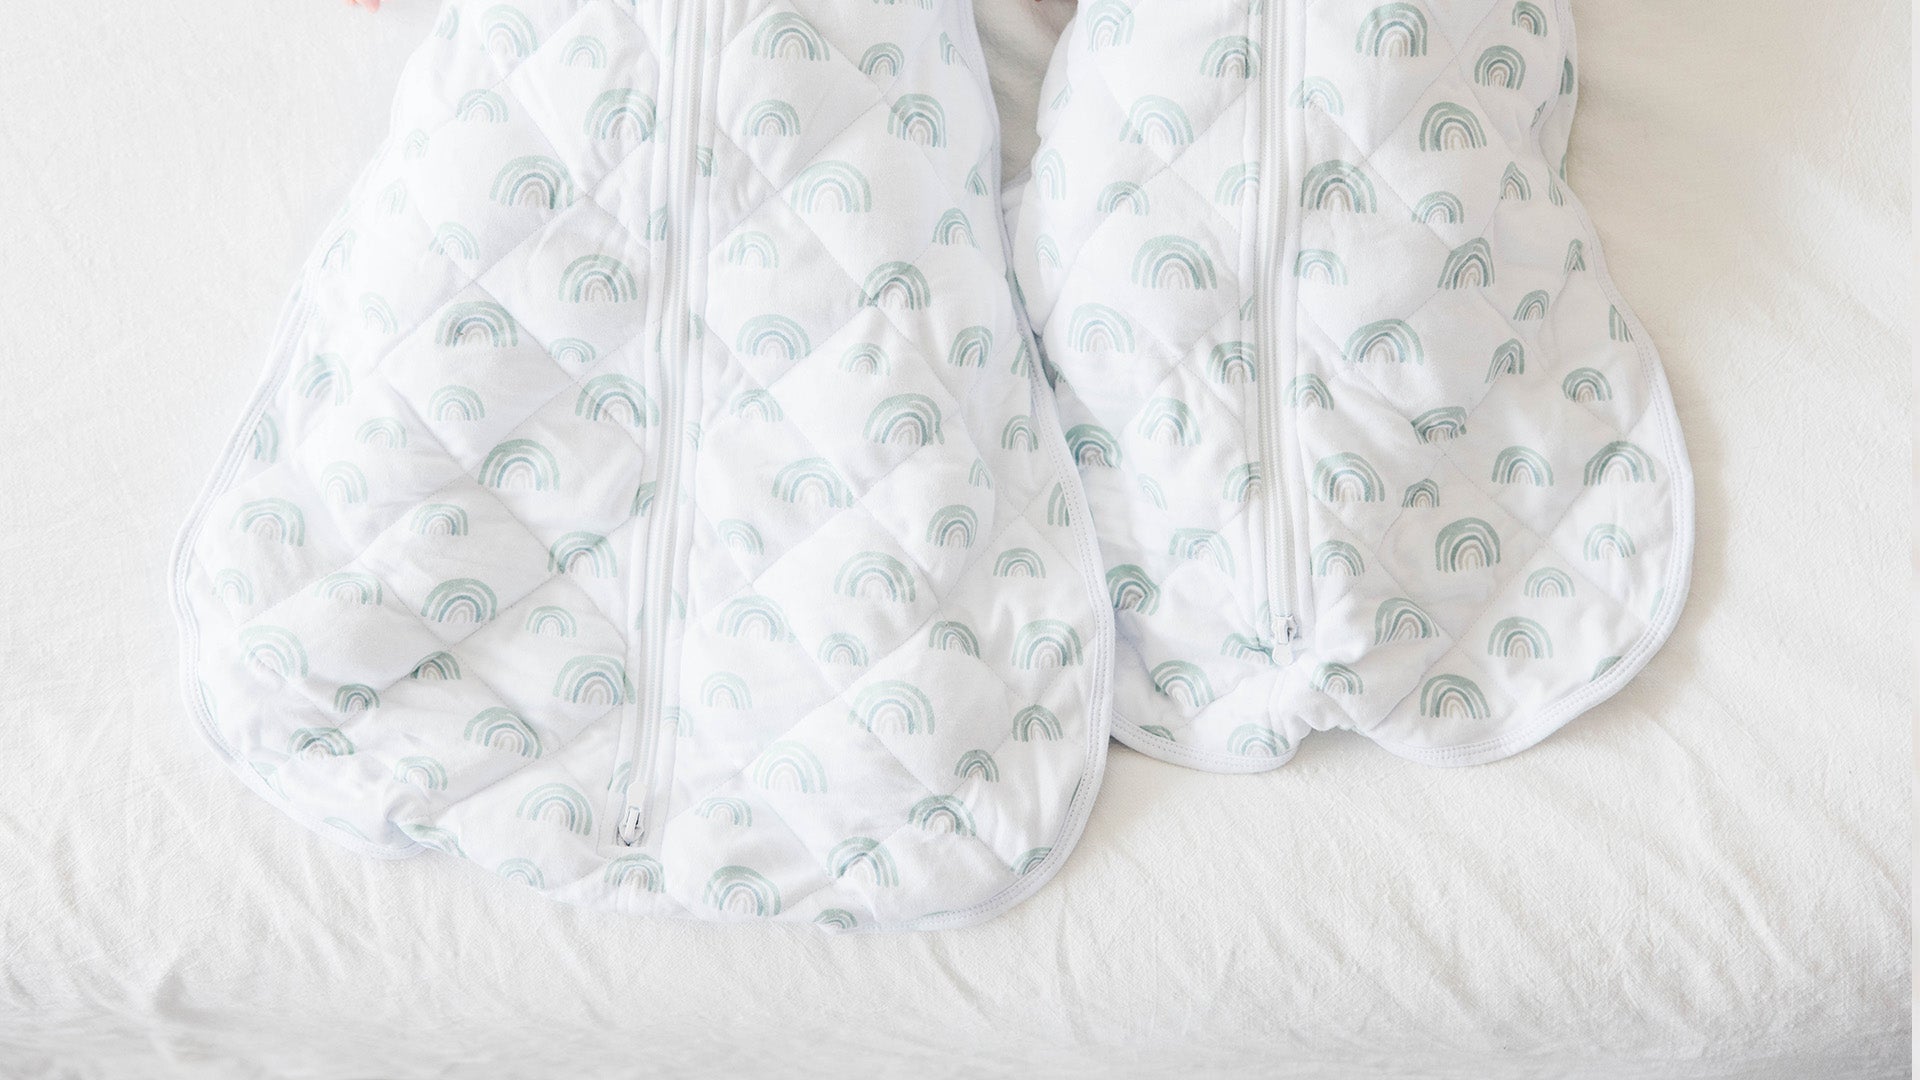 Transition Swaddle or Sleep Sack: Which One is Best for Your Baby?